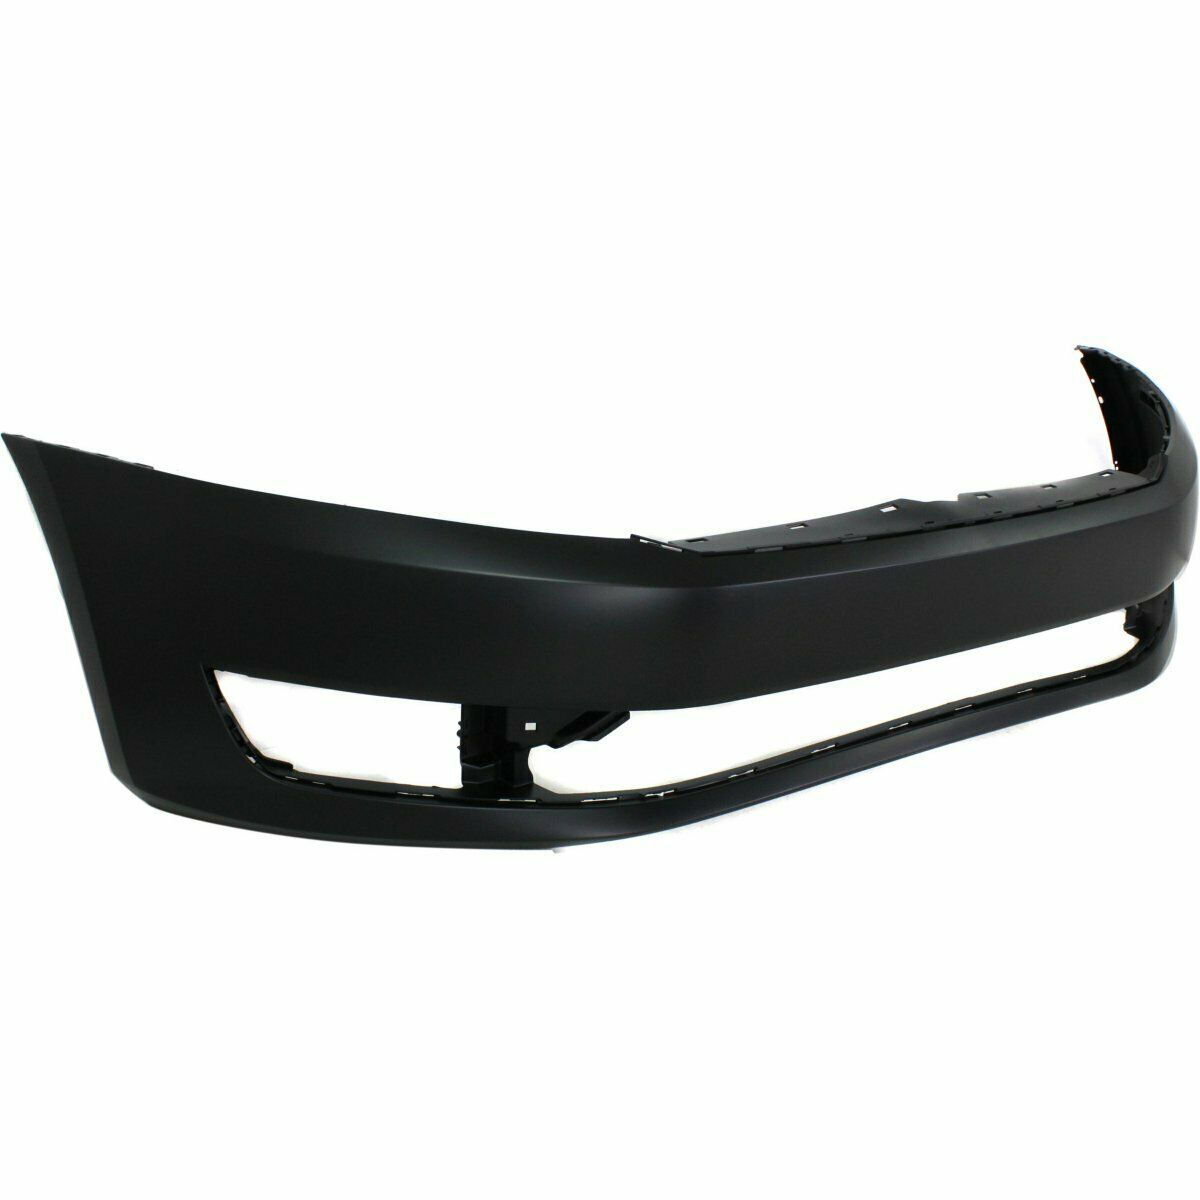 2012-2015 Volkswagen Passat Front Bumper with For Lamp Holes Painted to Match